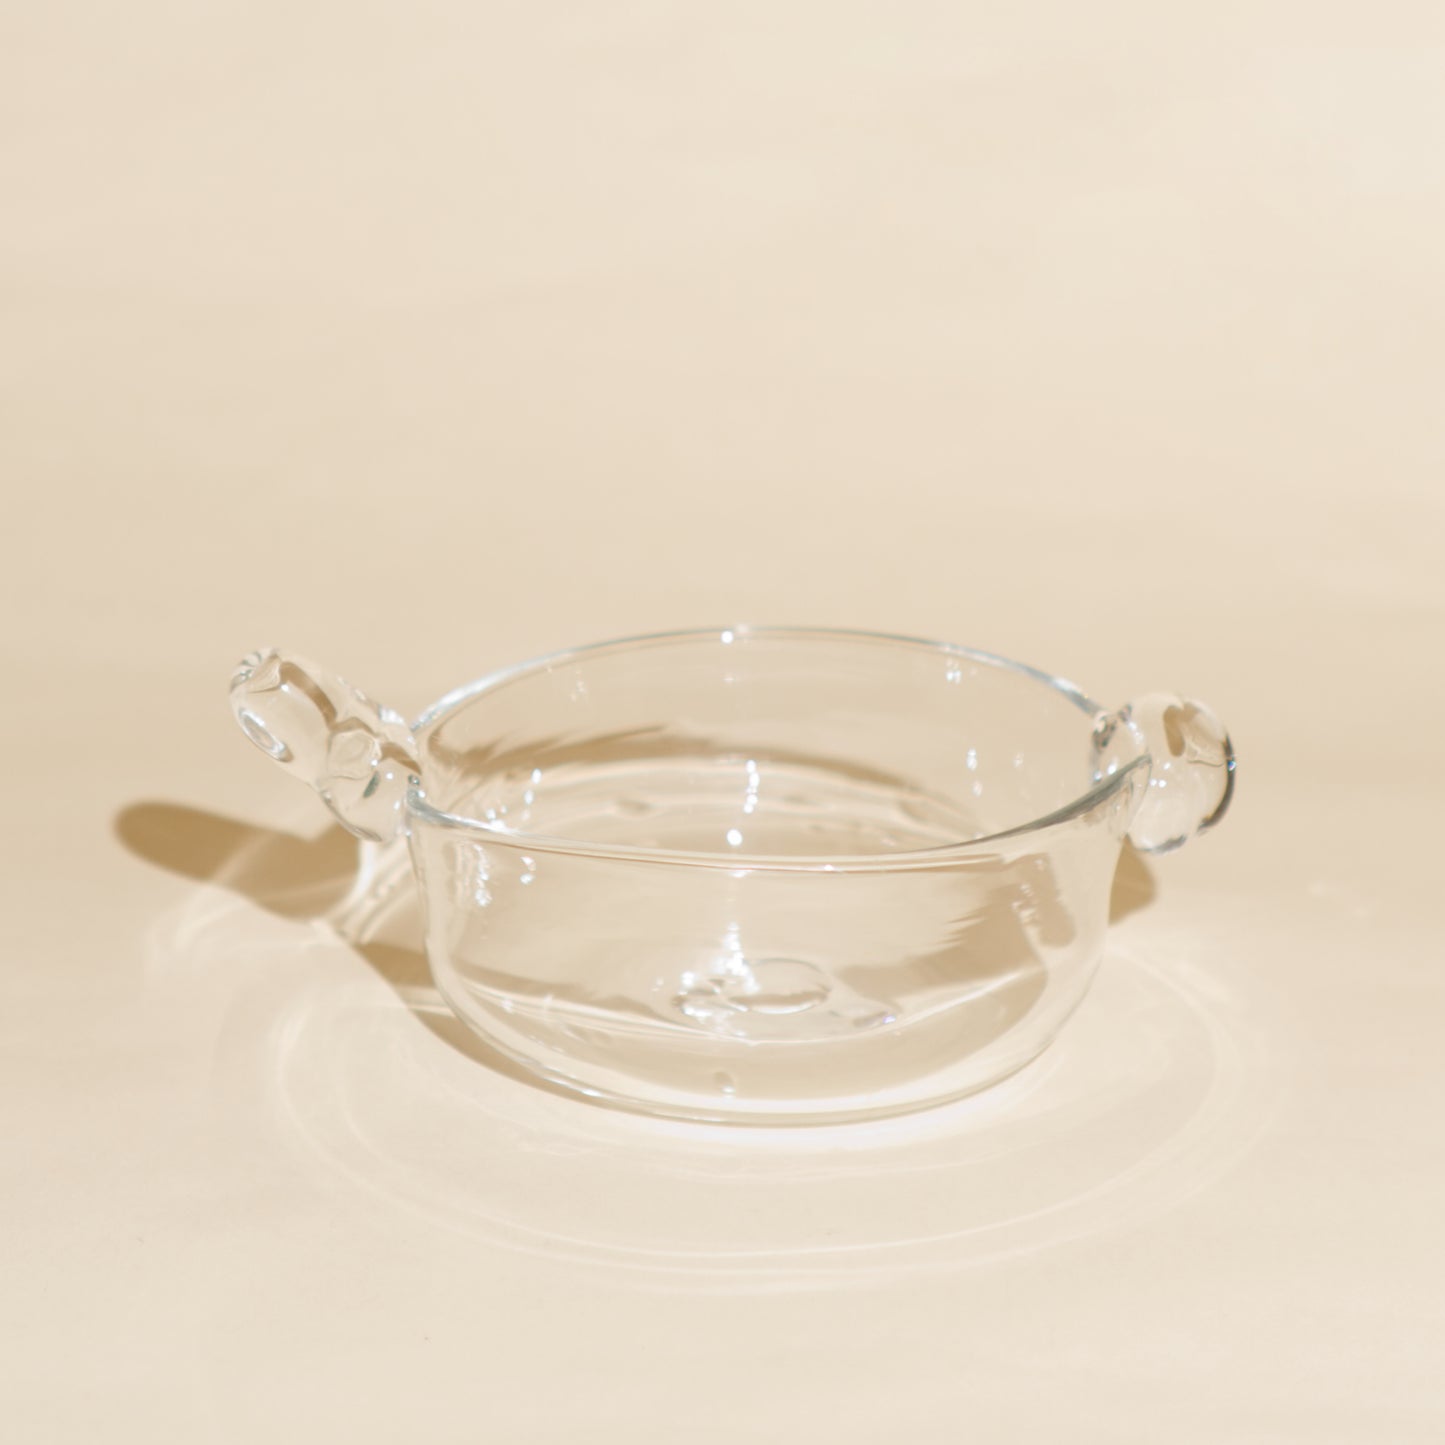 CAT BOWL CLEAR